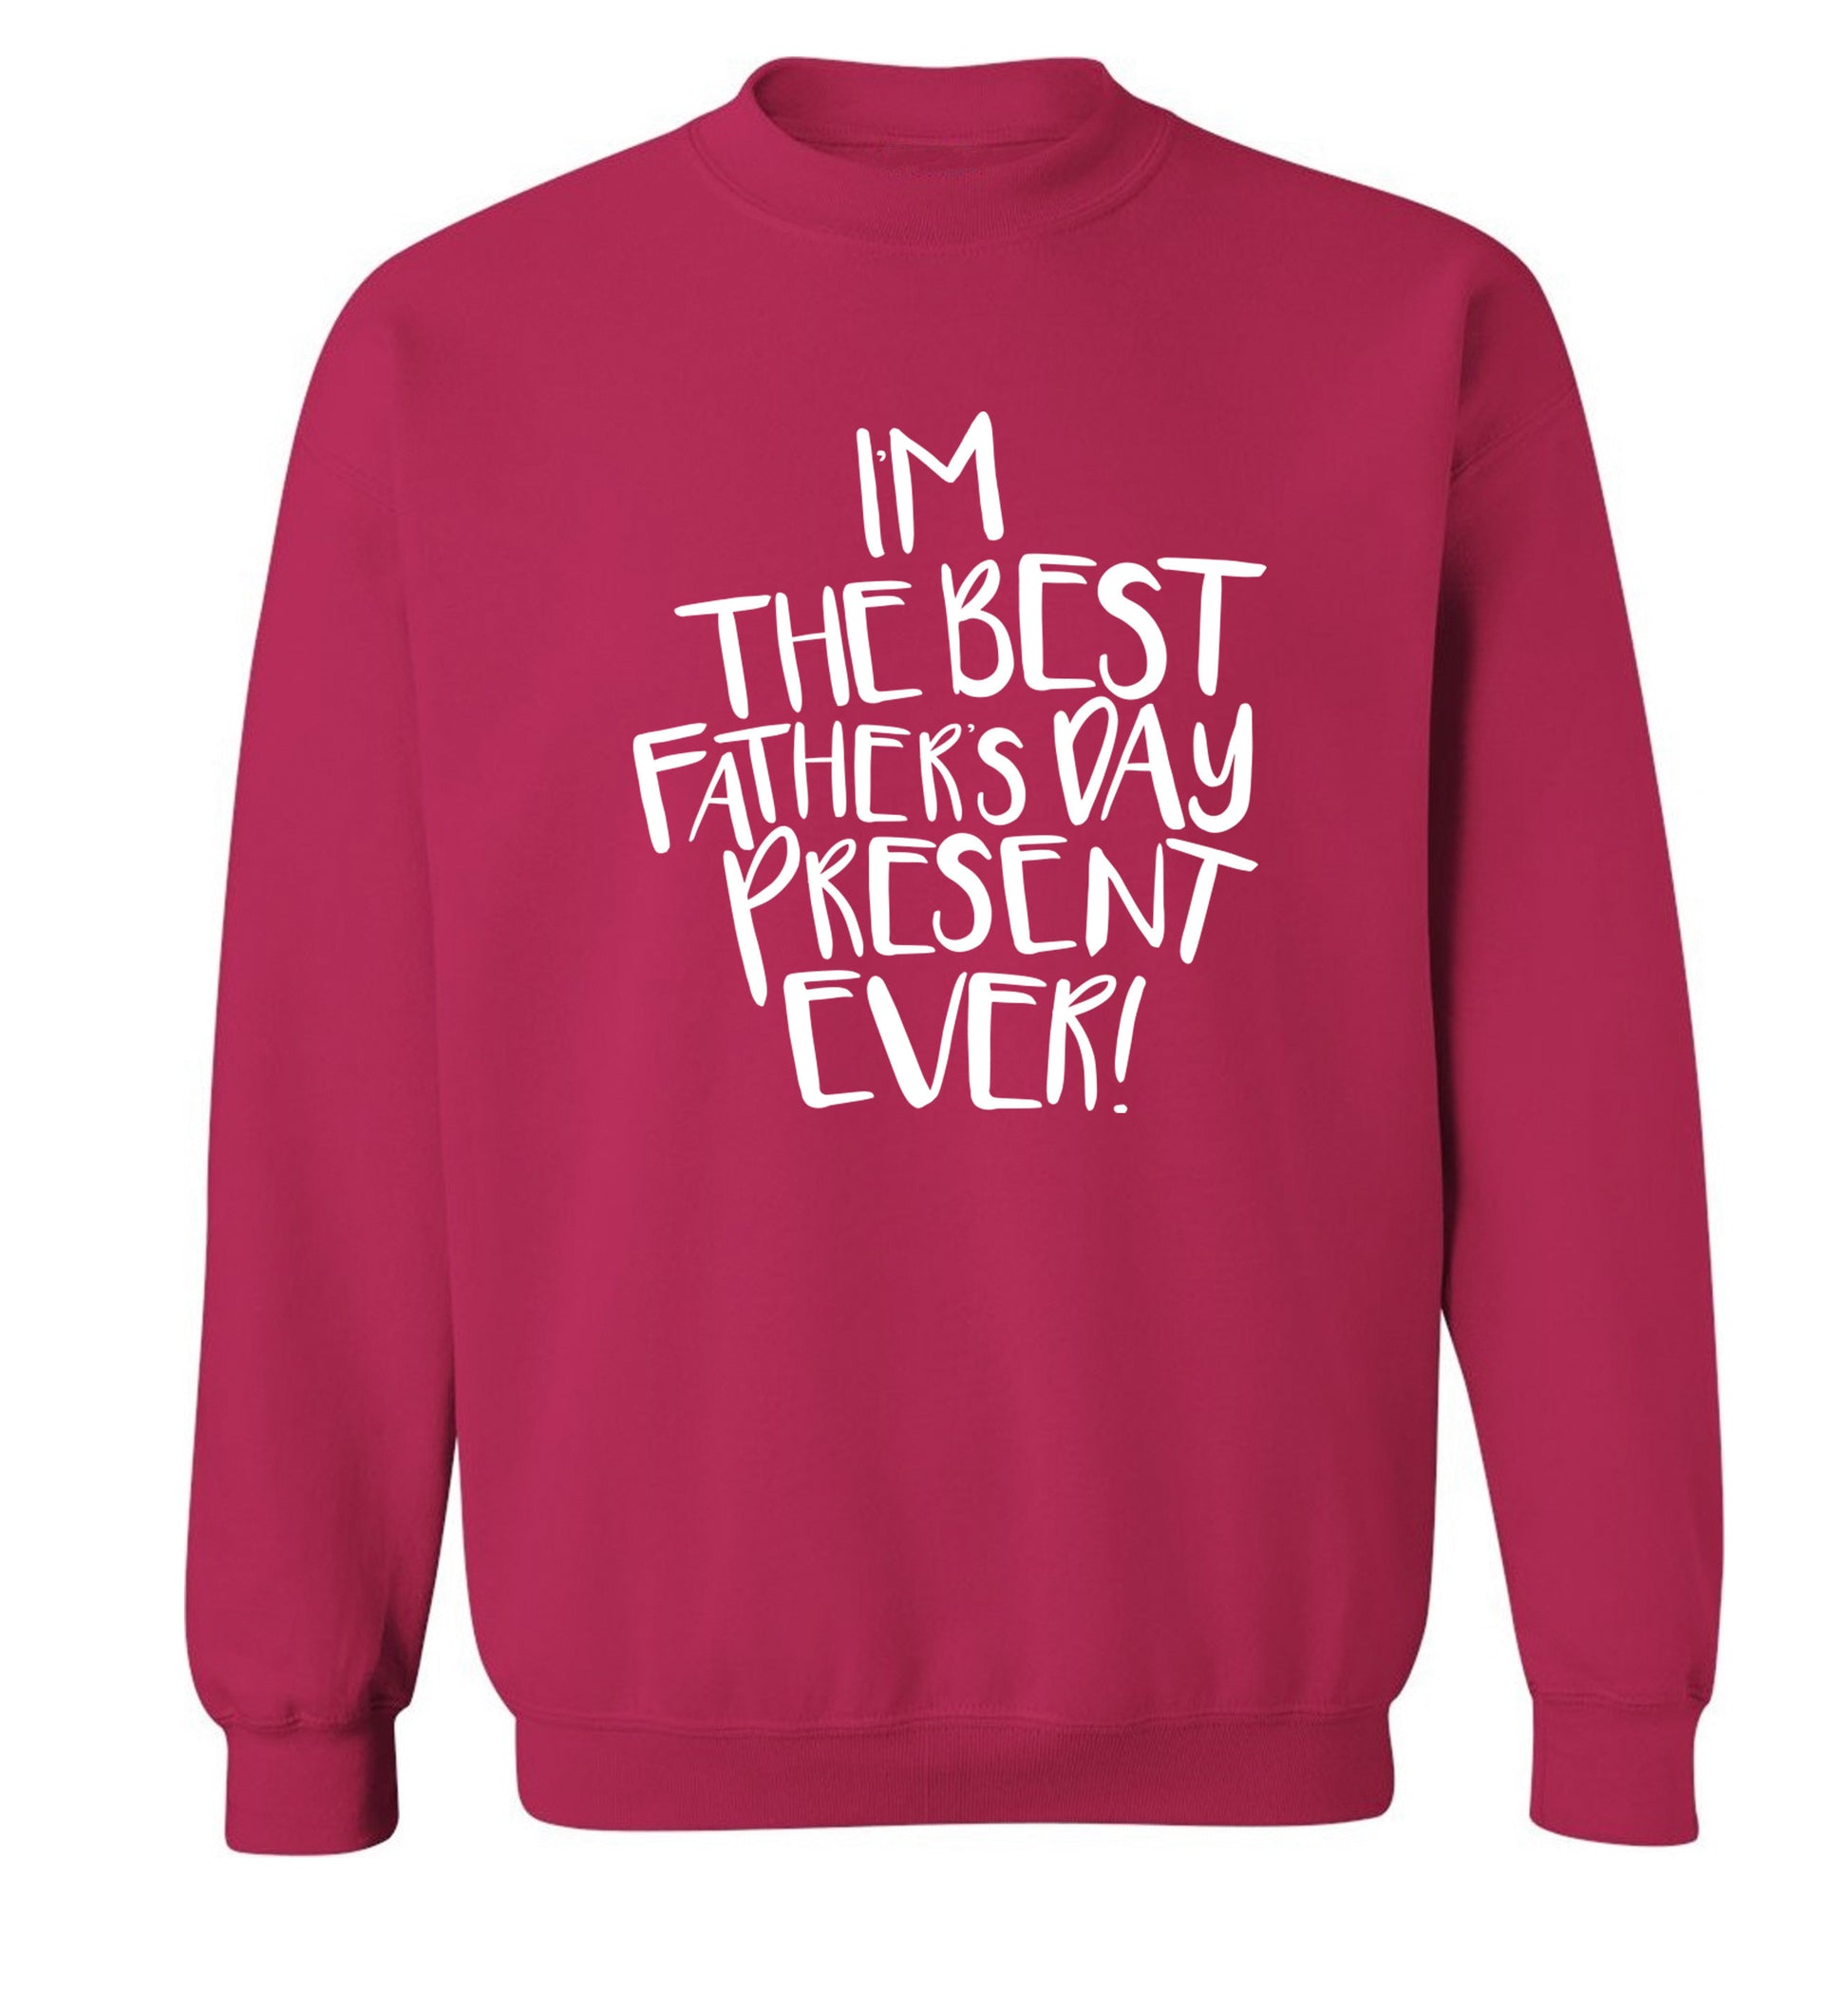 I'm the best father's day present ever! Adult's unisex pink Sweater 2XL